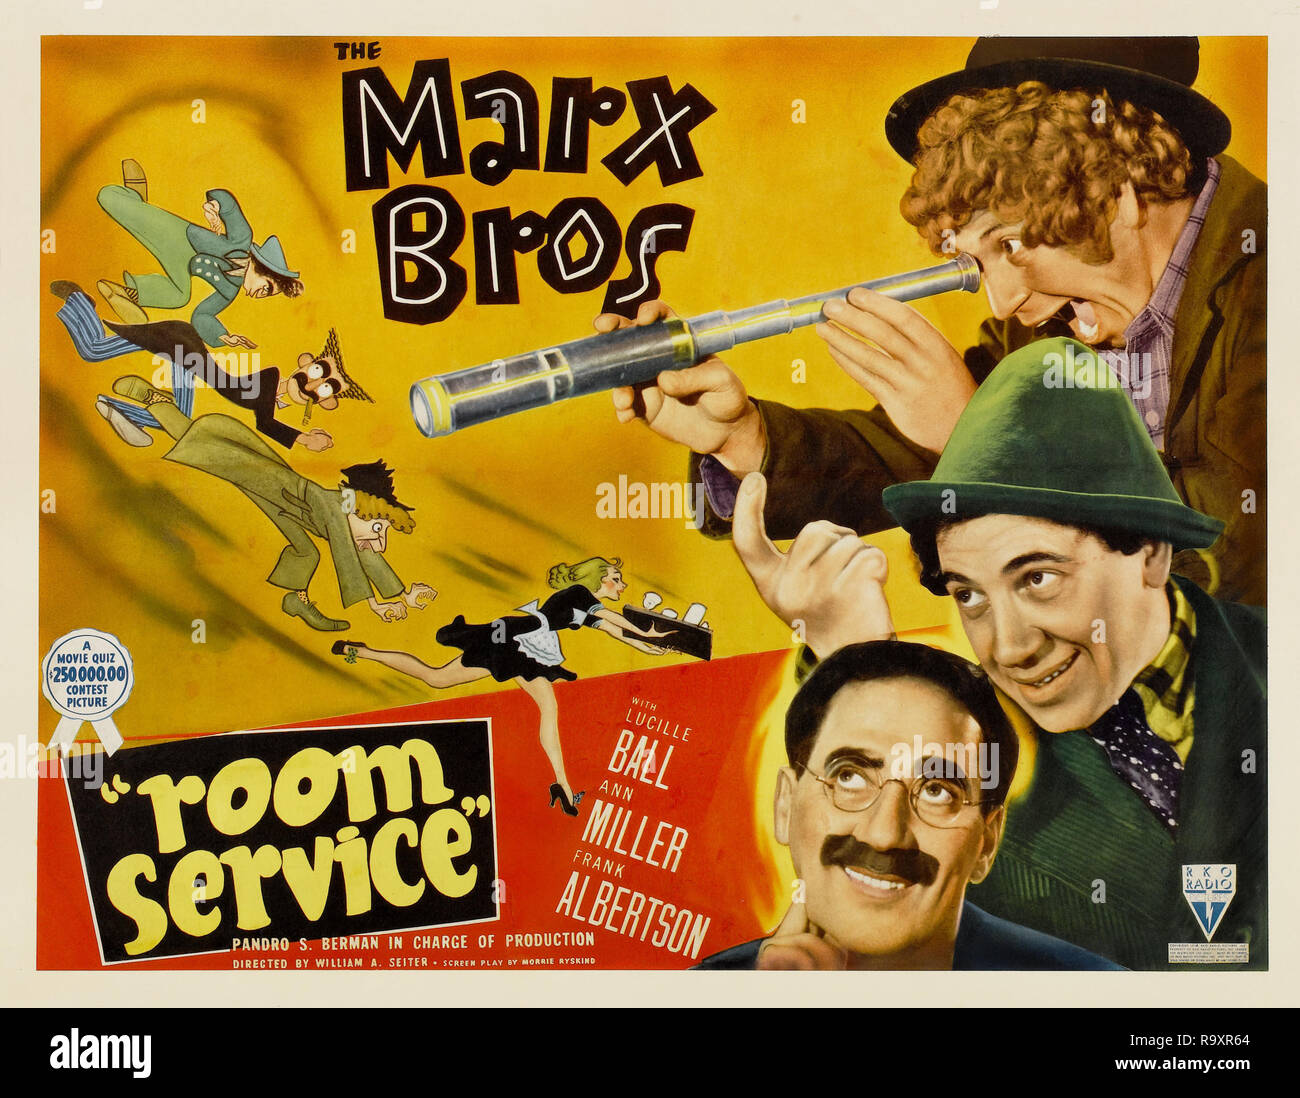 Zimmerservice (RKO, 1938) Poster/Lobby Card Marx Brothers Datei Referenz # 33635 962 THA Stockfoto